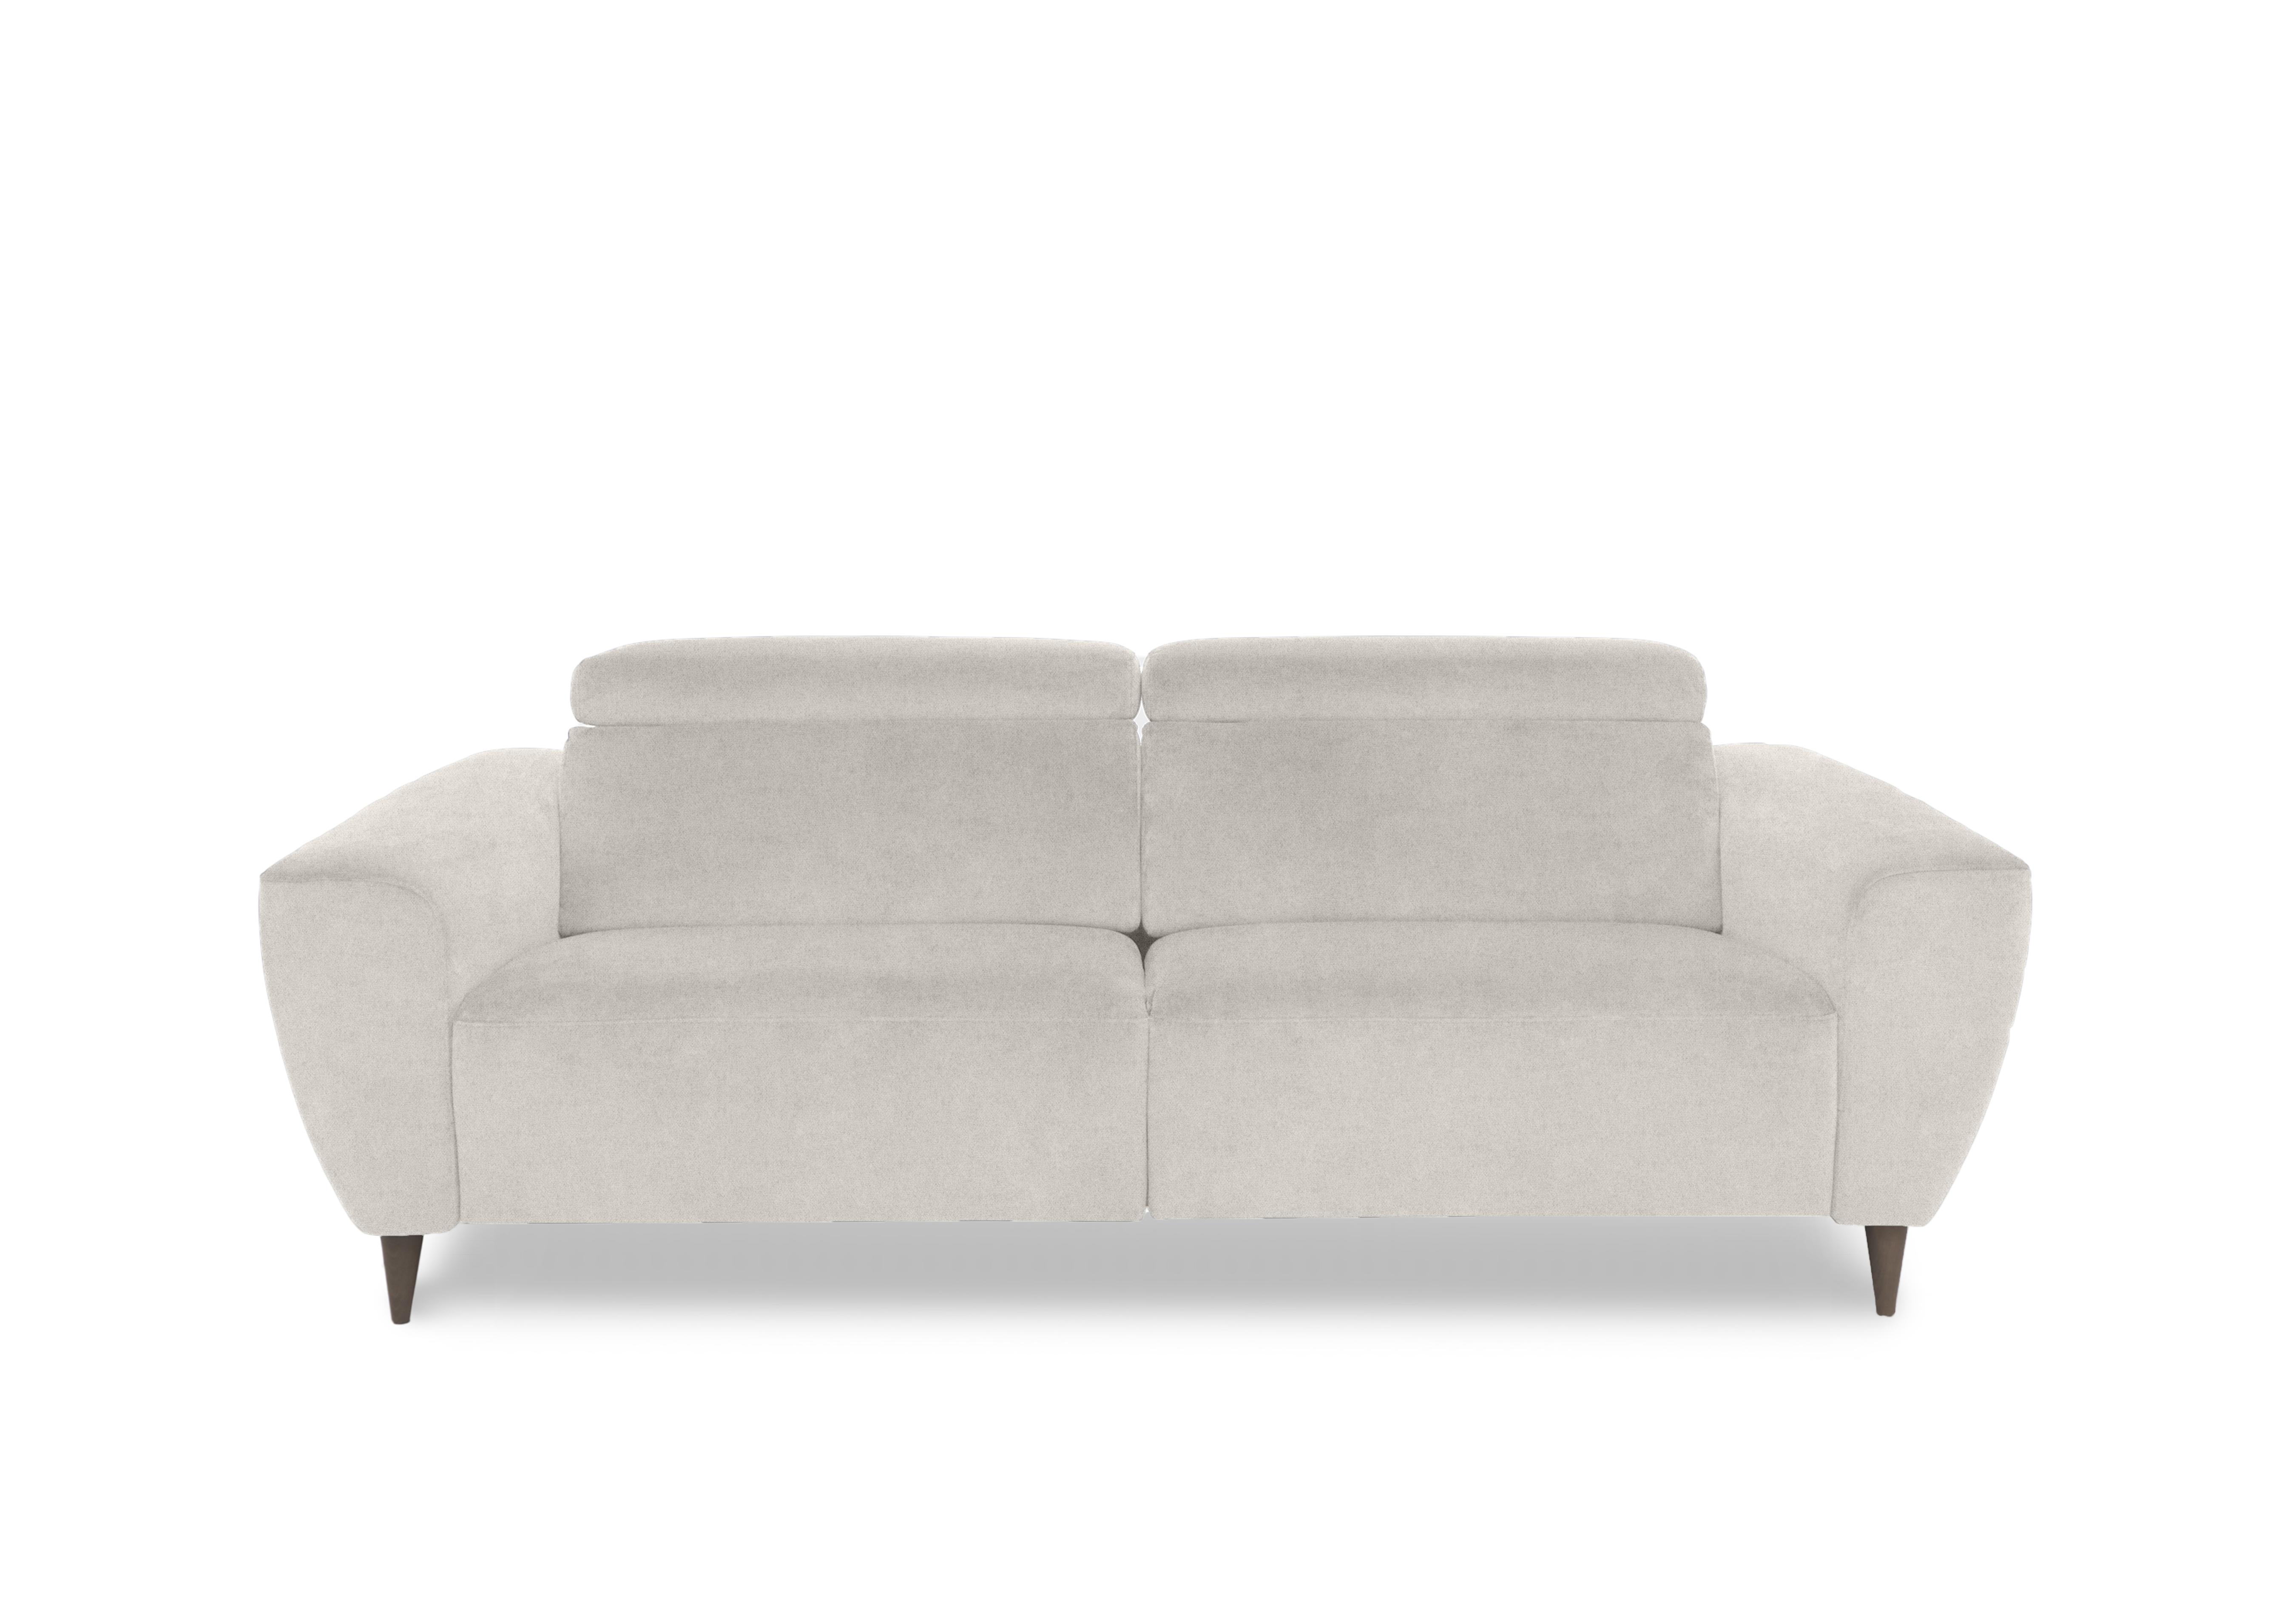 Milano 3 Seater Fabric Sofa in Fuente Beige To Ft on Furniture Village